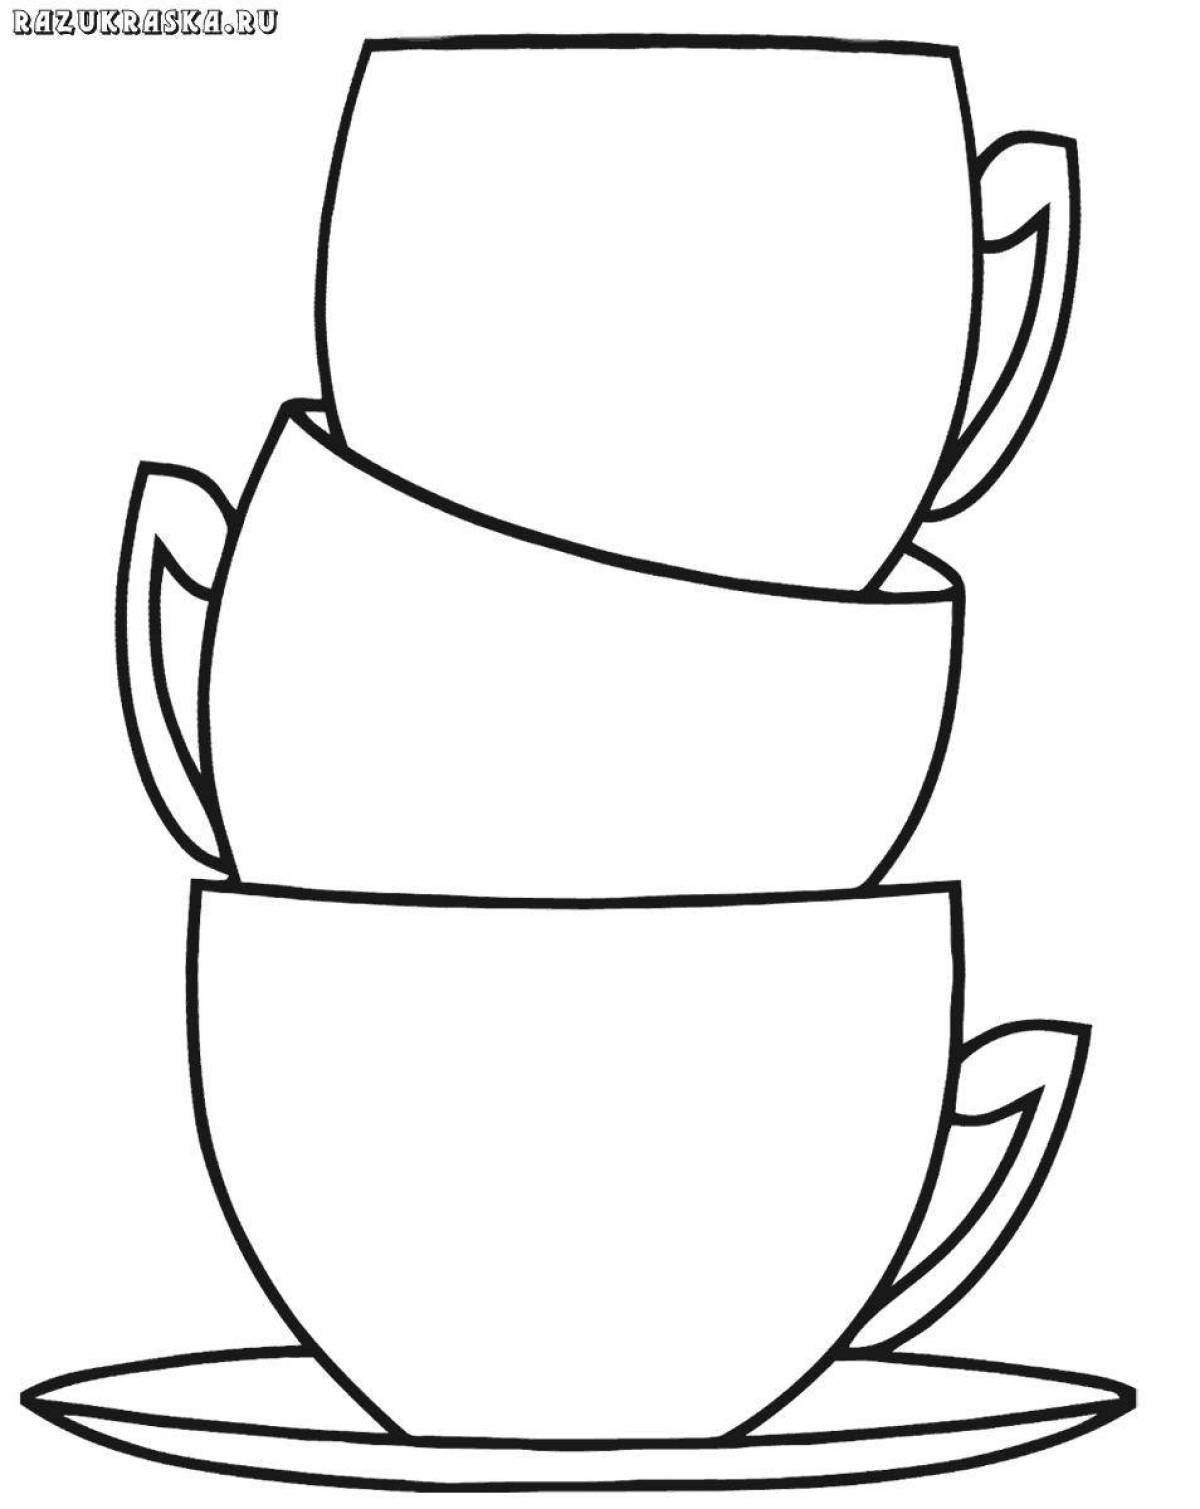 Fun cup coloring for kids